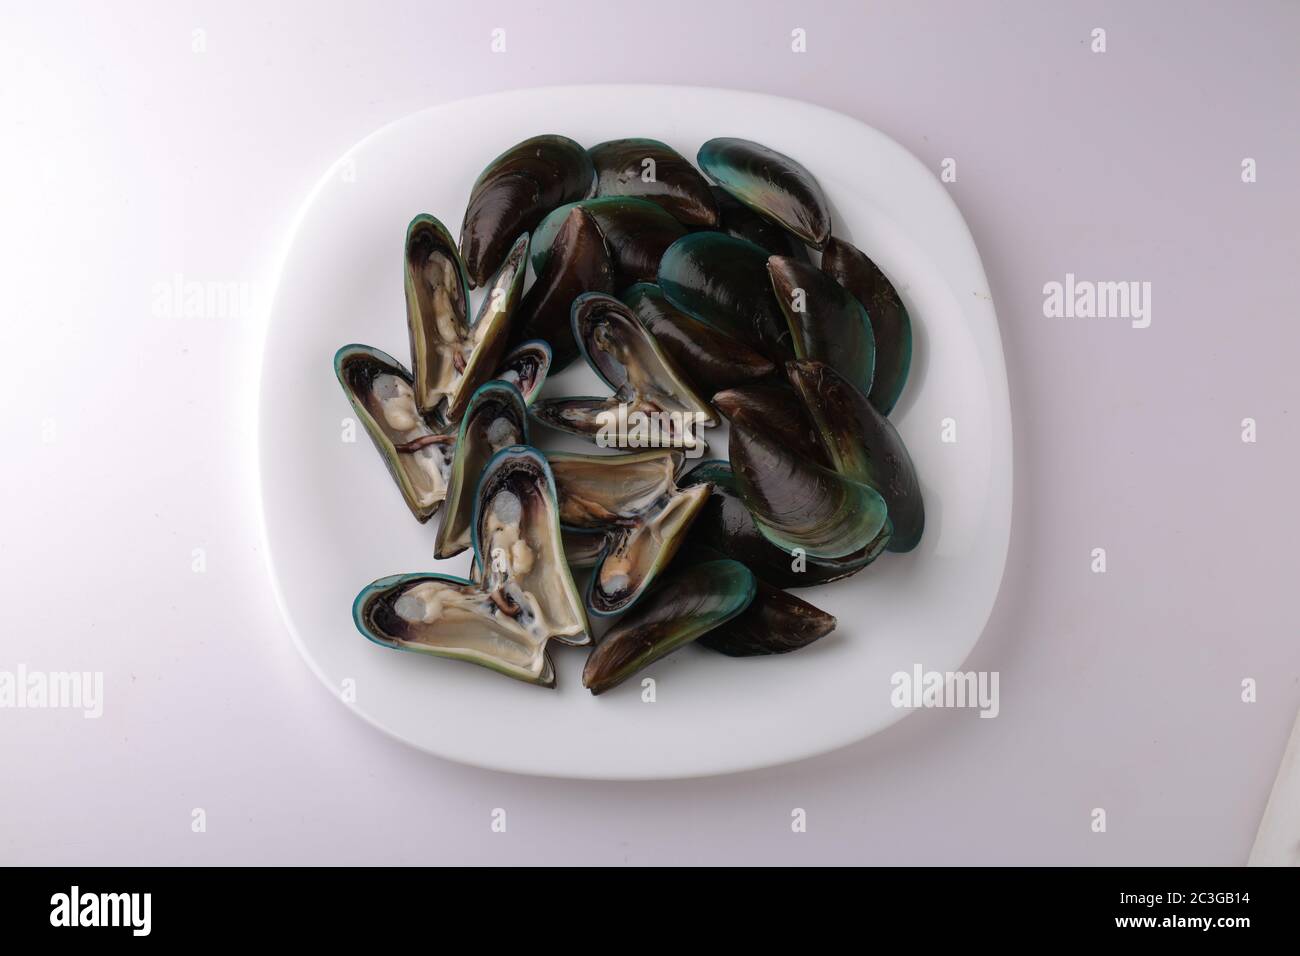 Kerala raw Mussels,kerala raw shell fishes arranged in a white plate with white texture or background Stock Photo